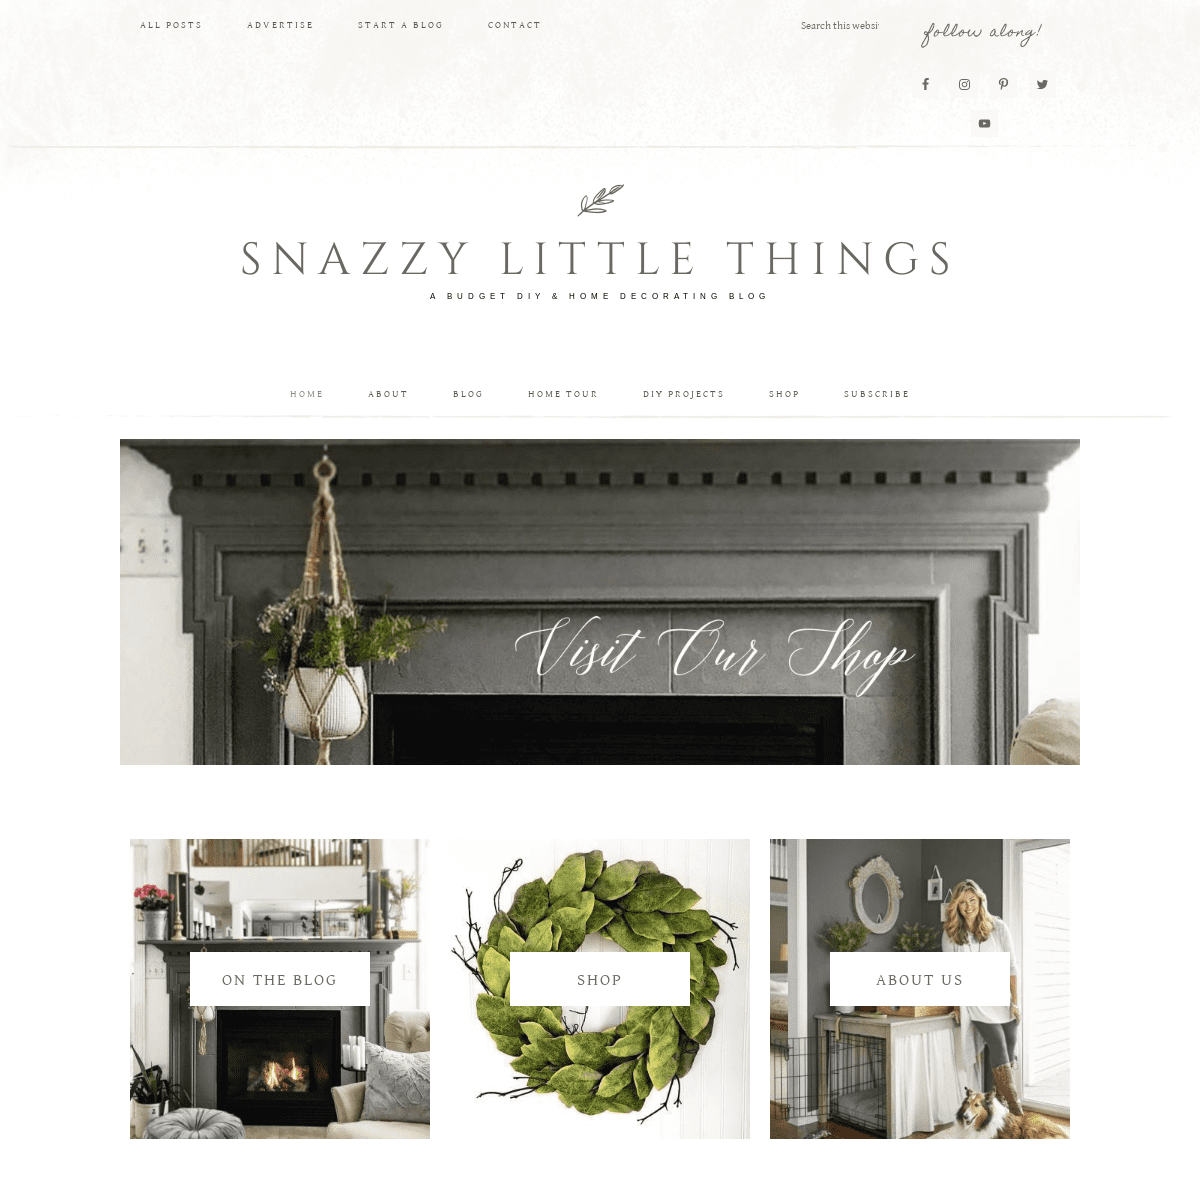 snazzy little things | A Budget DIY & Home Decorating Blog